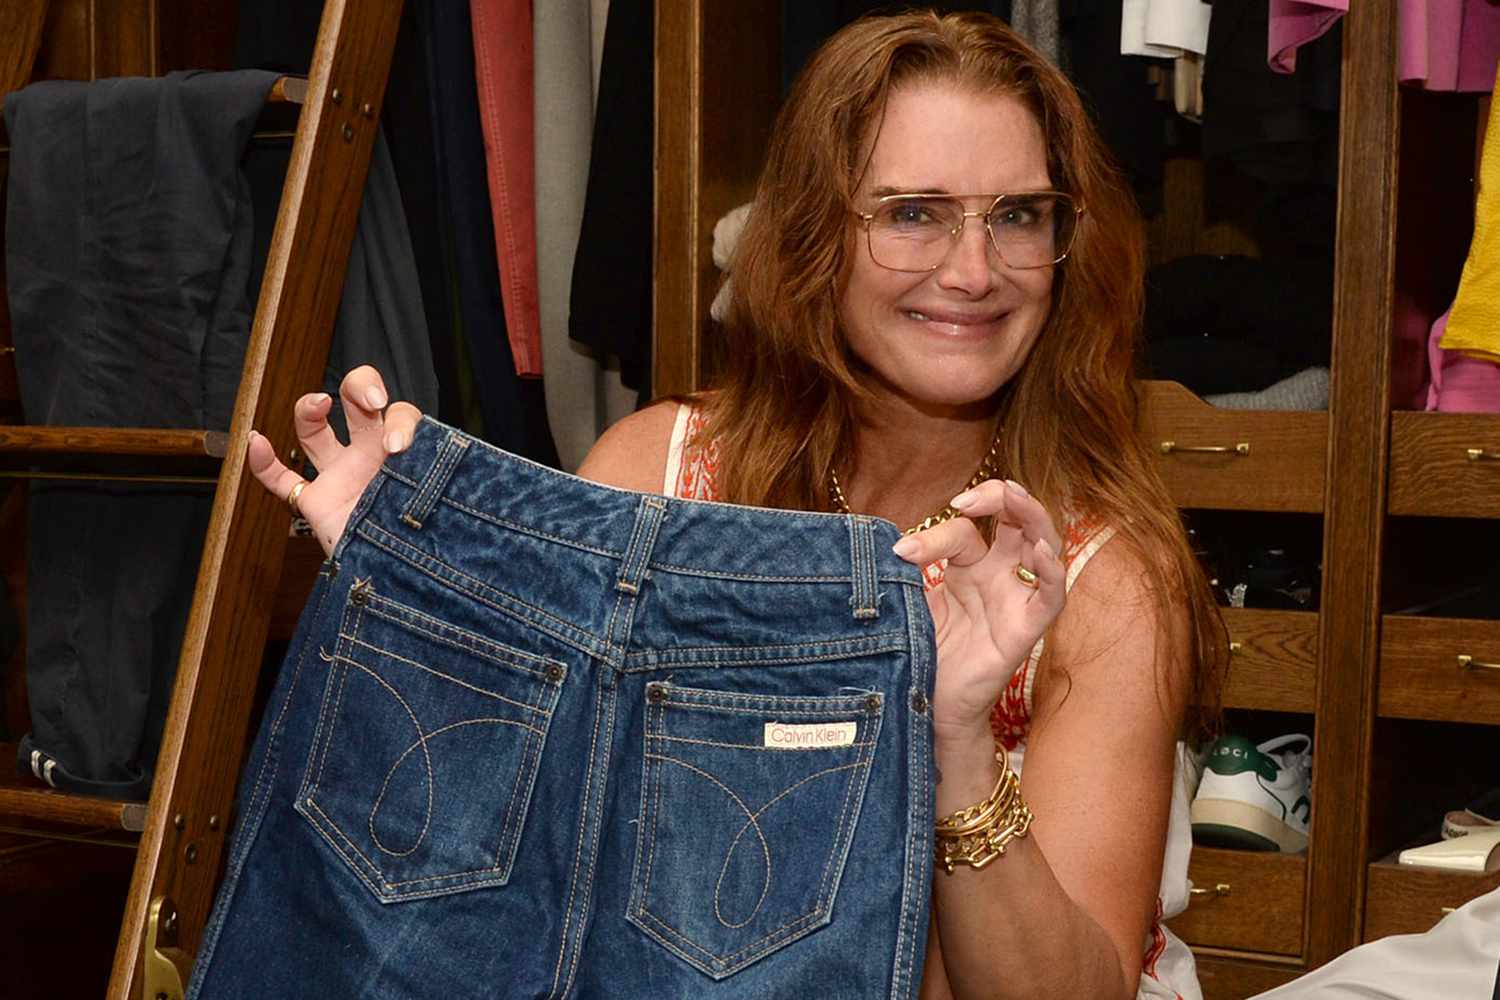 Brooke Shields' Iconic Calvin Klein Jeans Going to Auction: 'Can't Wait for Someone to Show These Off' (Exclusive)